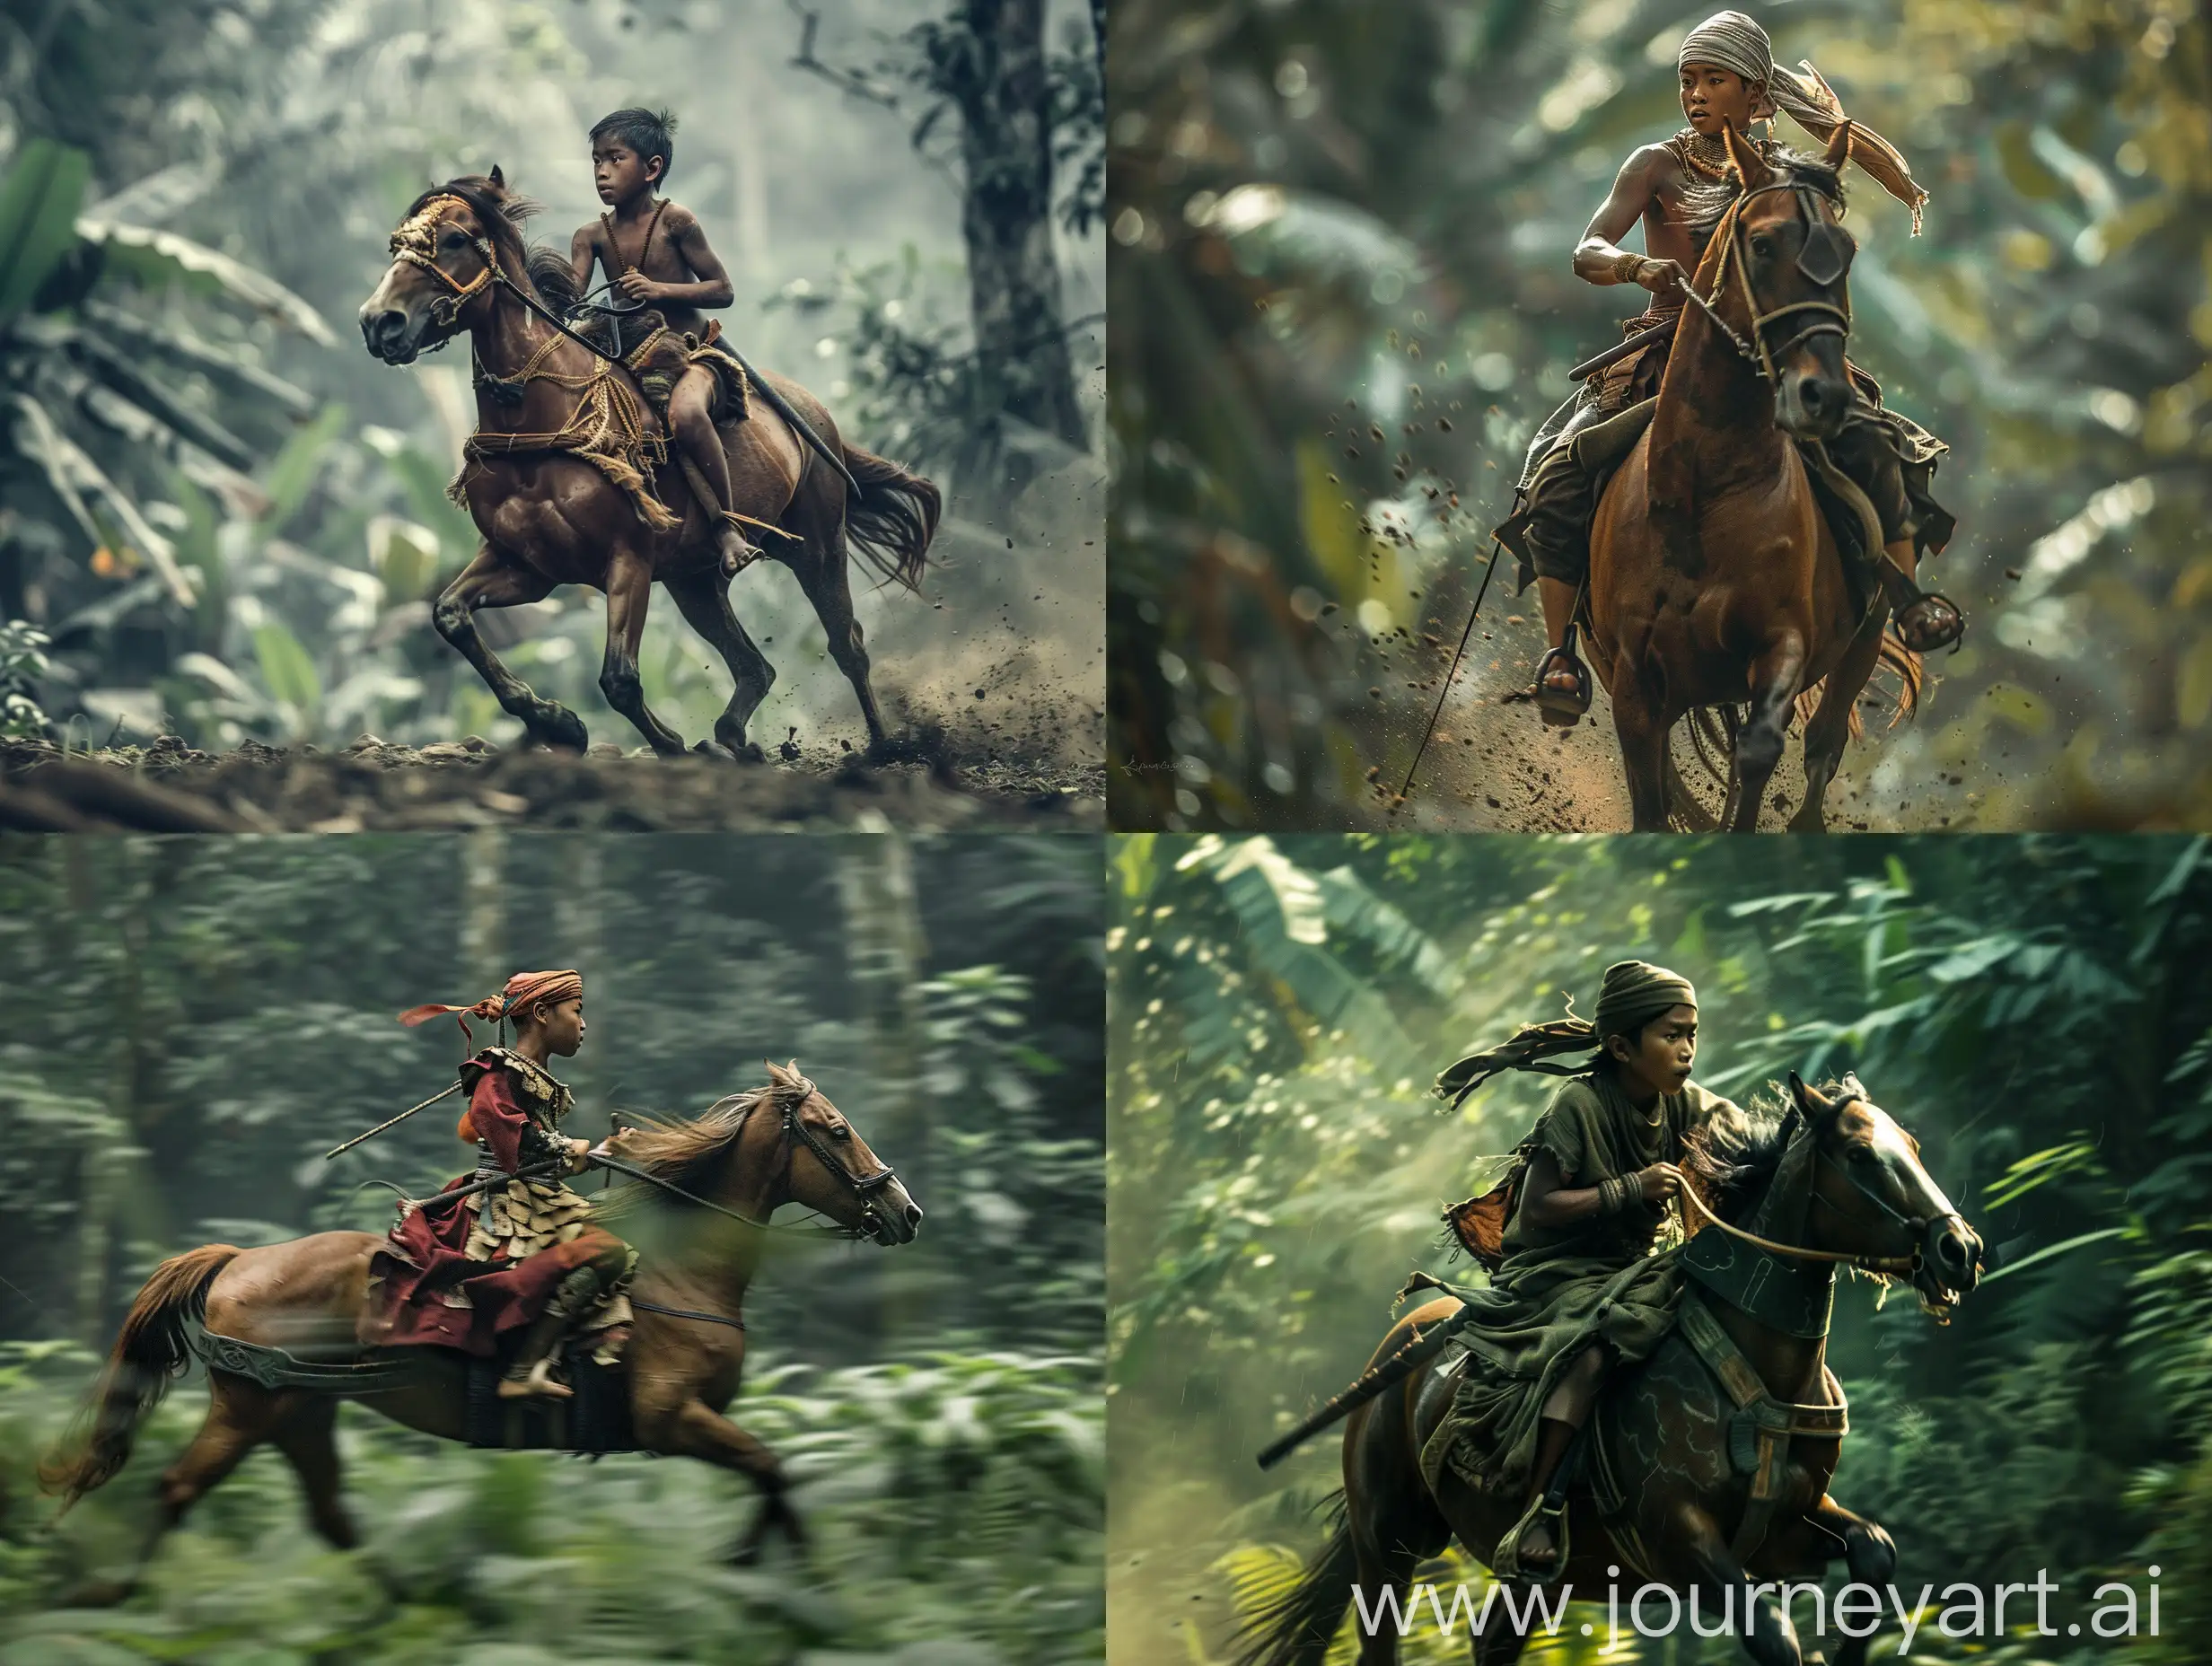 Indonesian-Warrior-Riding-Horse-in-Majapahit-Forest